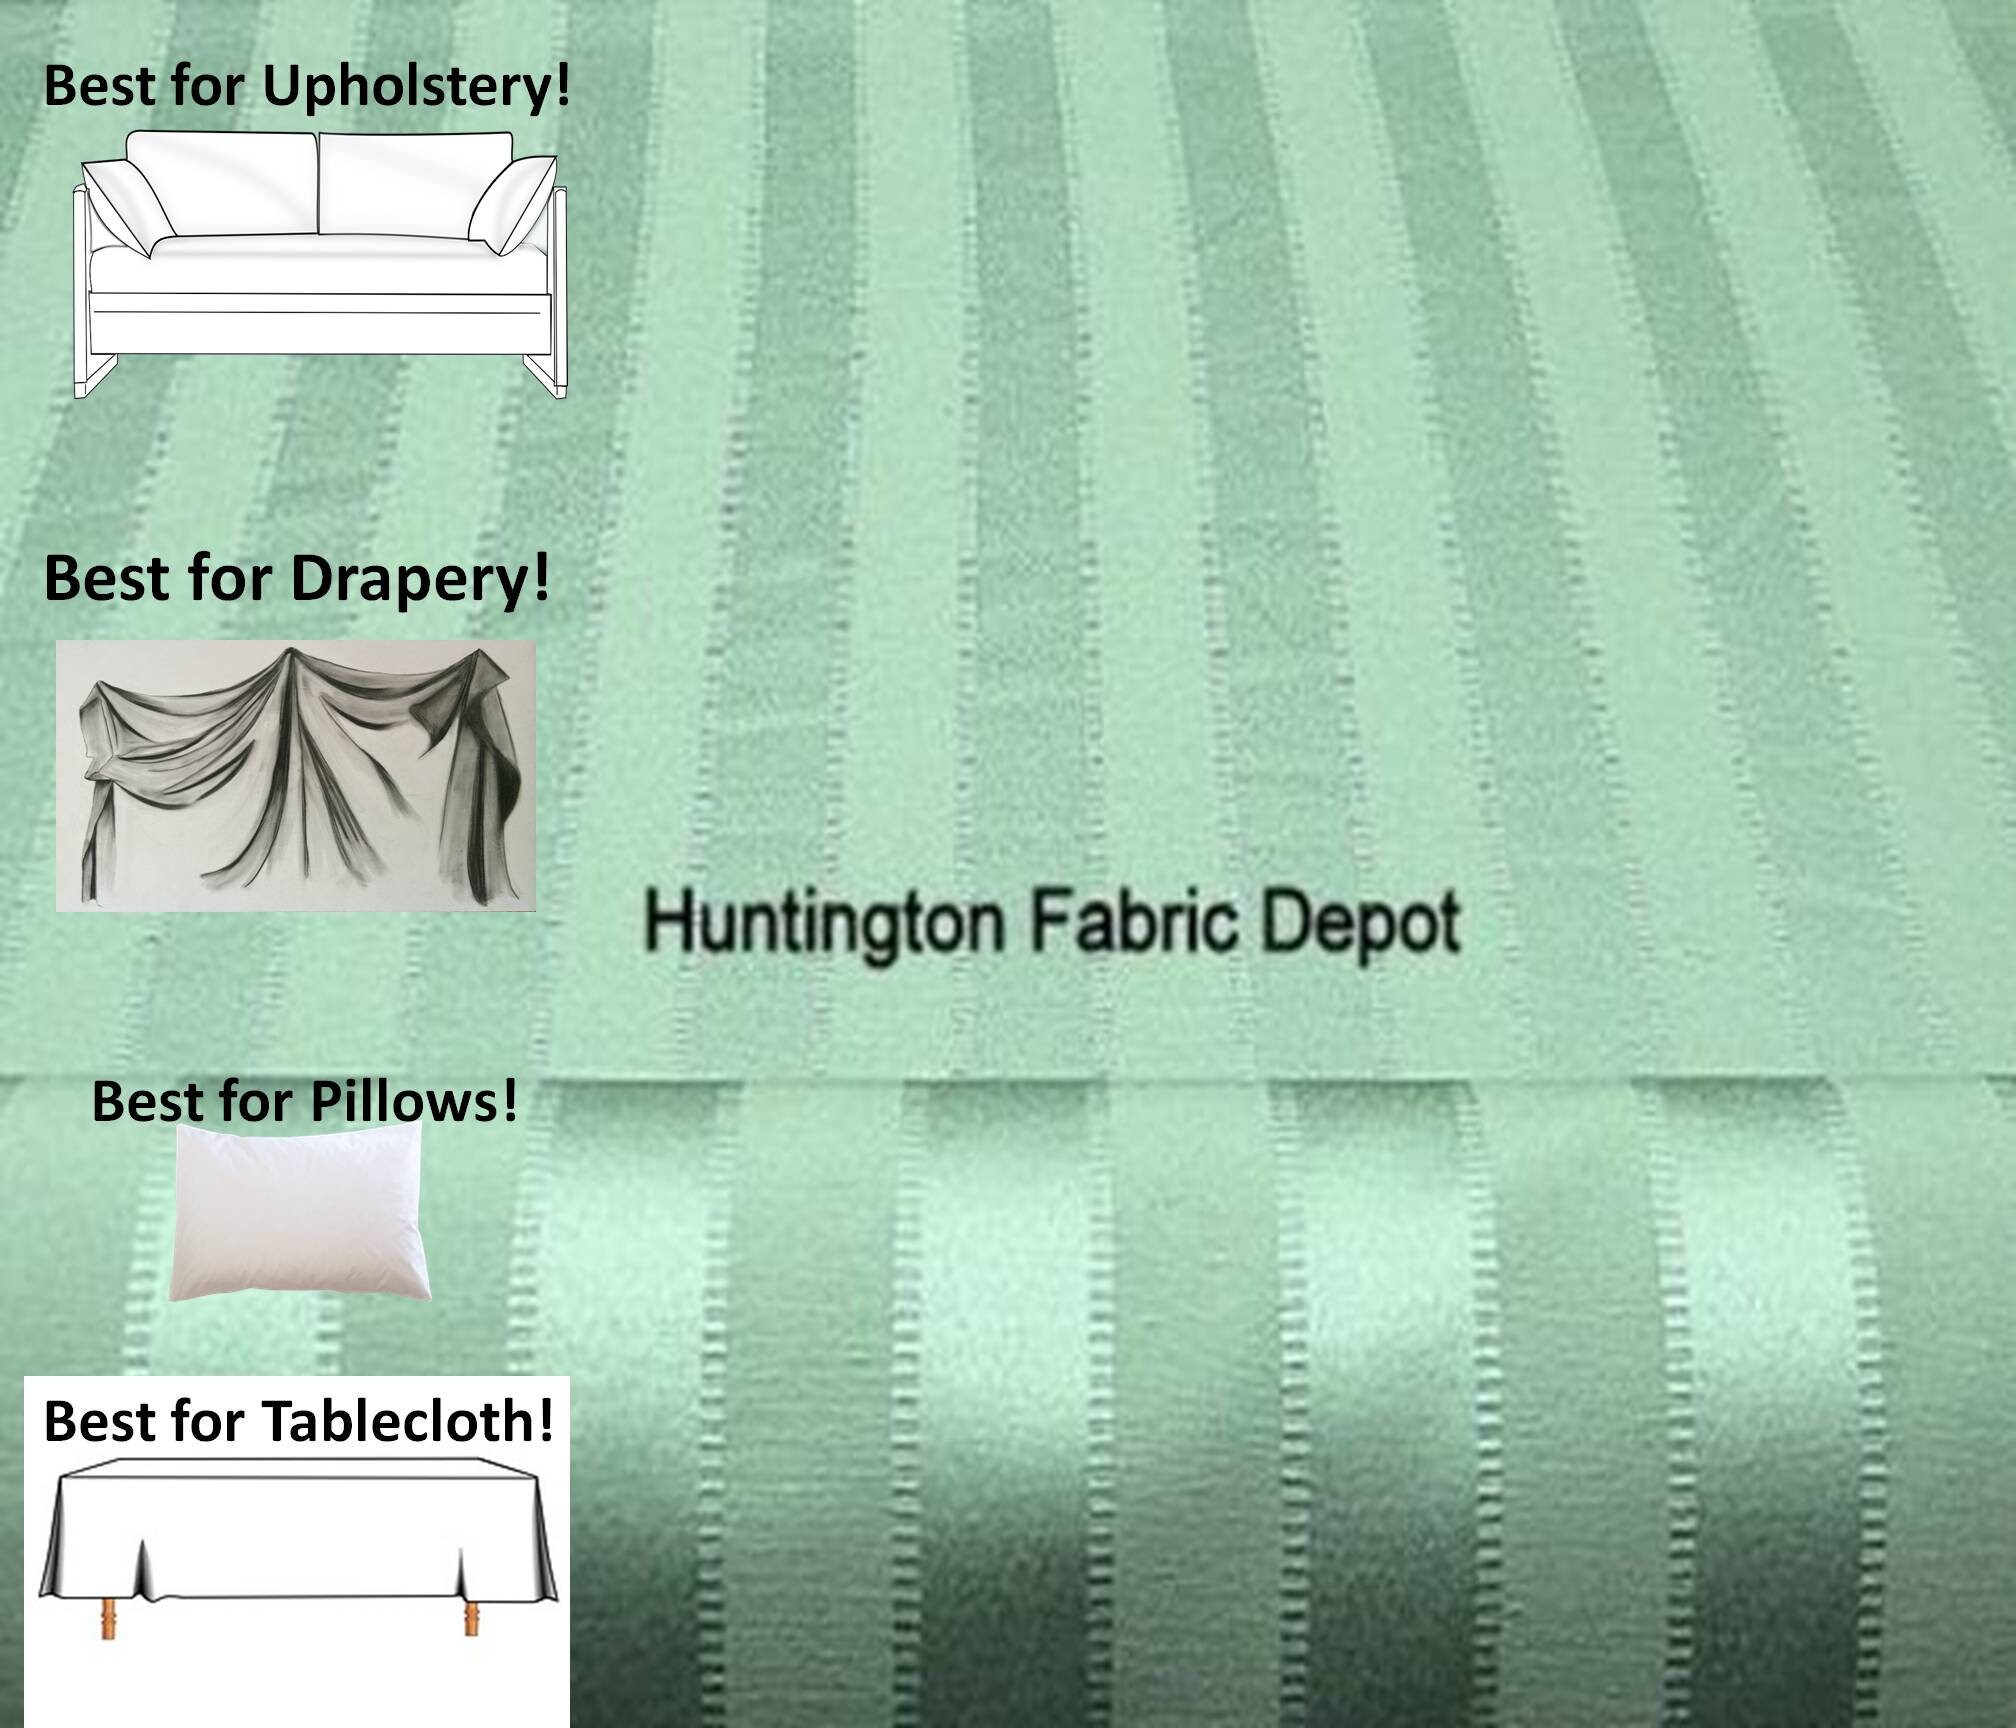 What is the Best Fabric for Drapery?